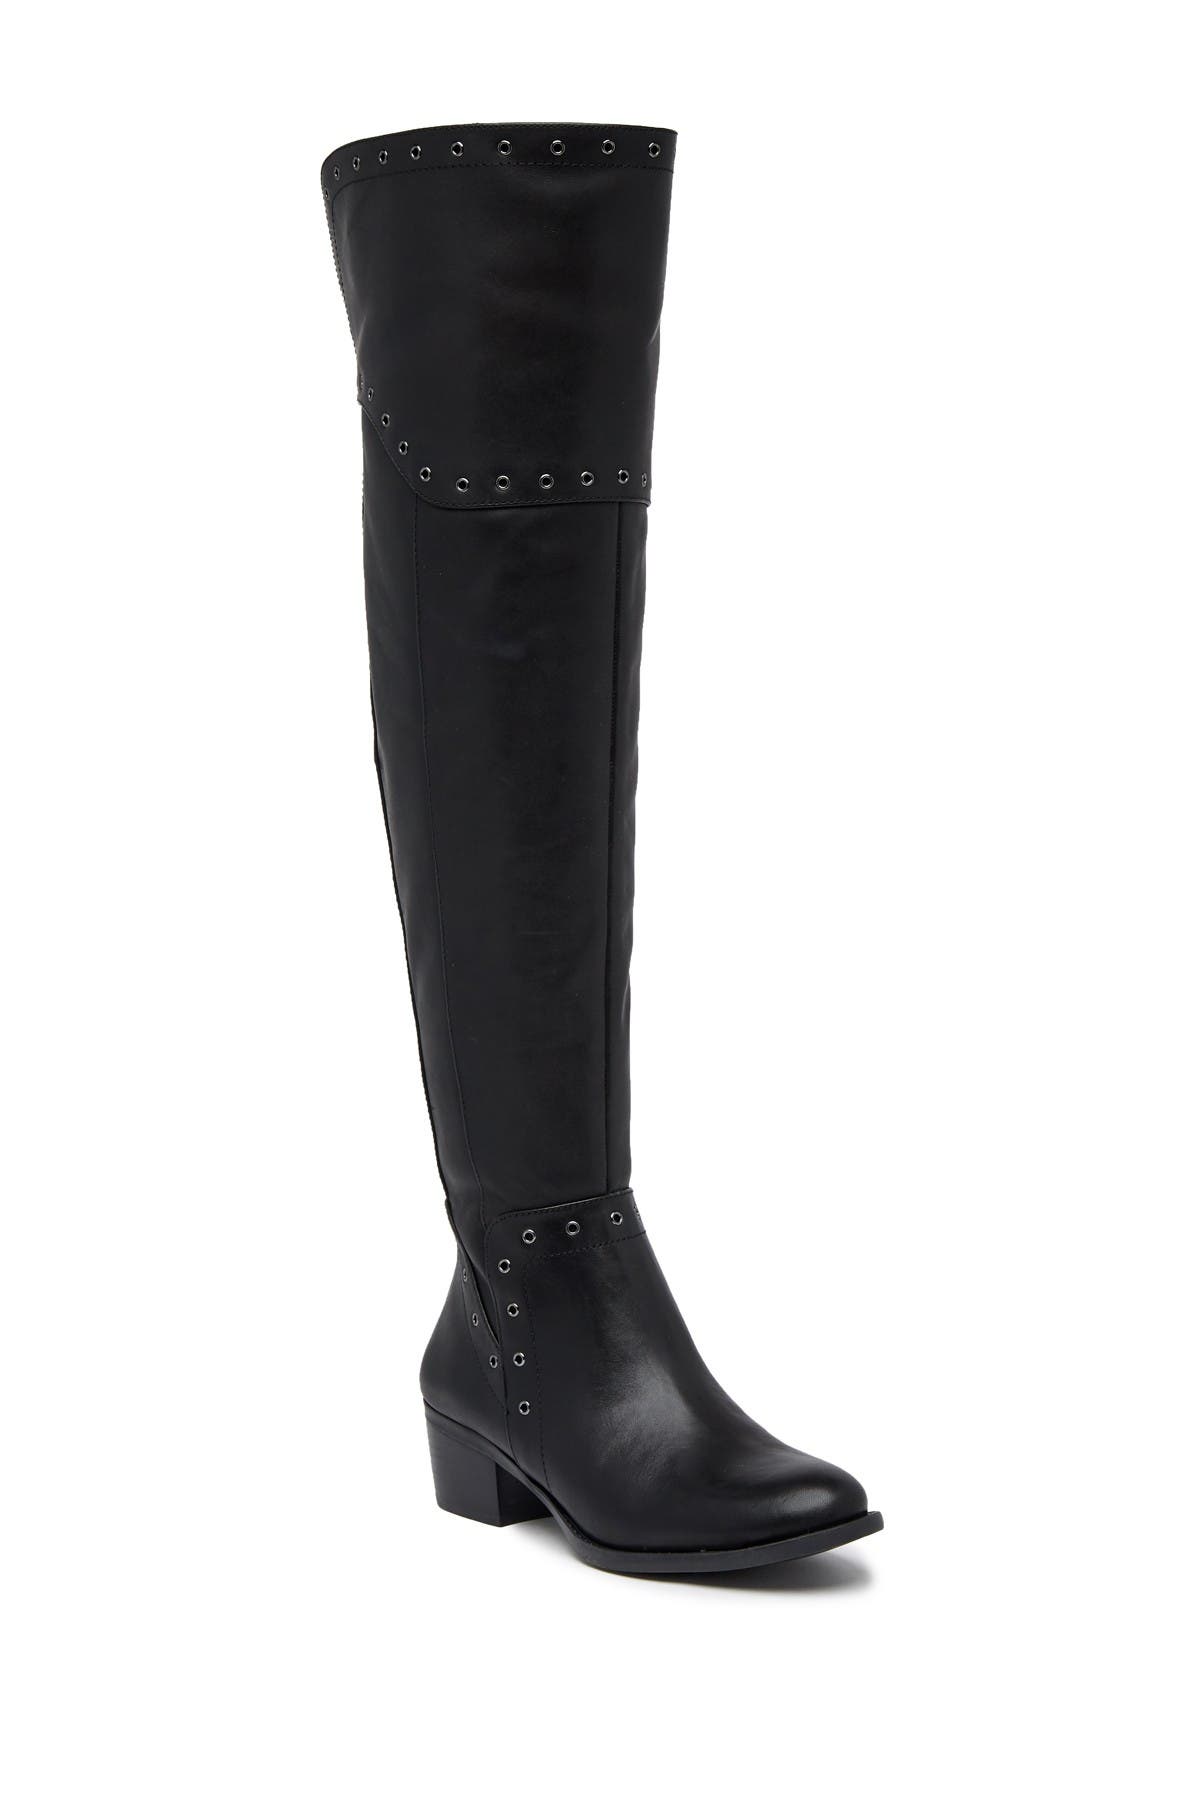 Vince Camuto | Bestan Over-the-Knee 